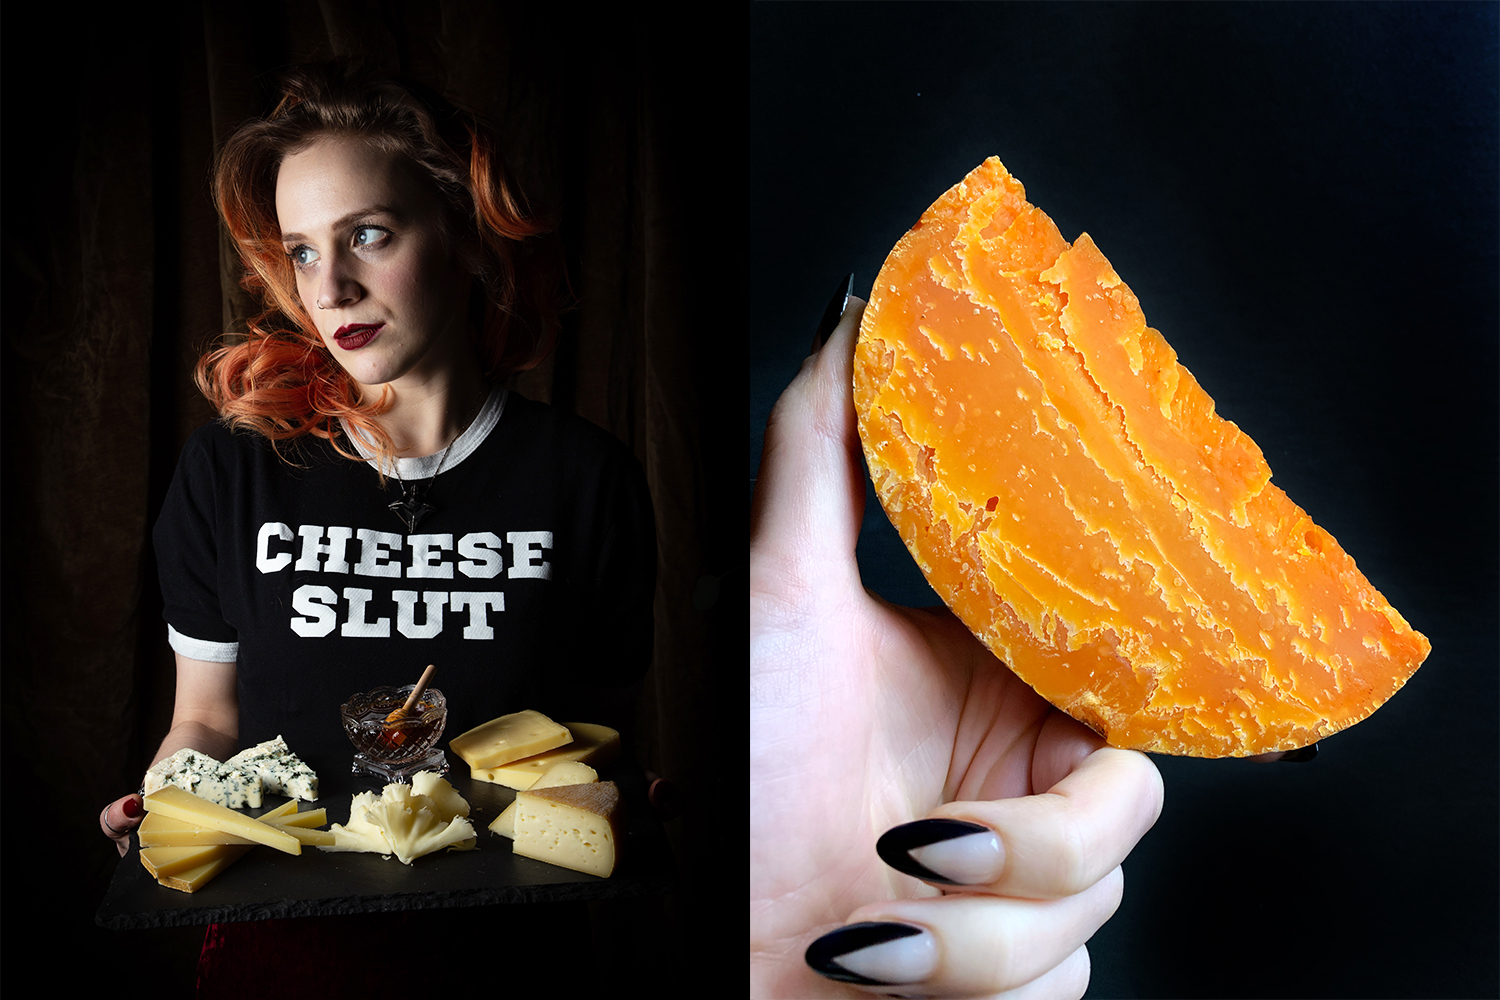 Cheese expert and author Erika Kubick in the left photo, and her holding mimolette cheese in the right photo